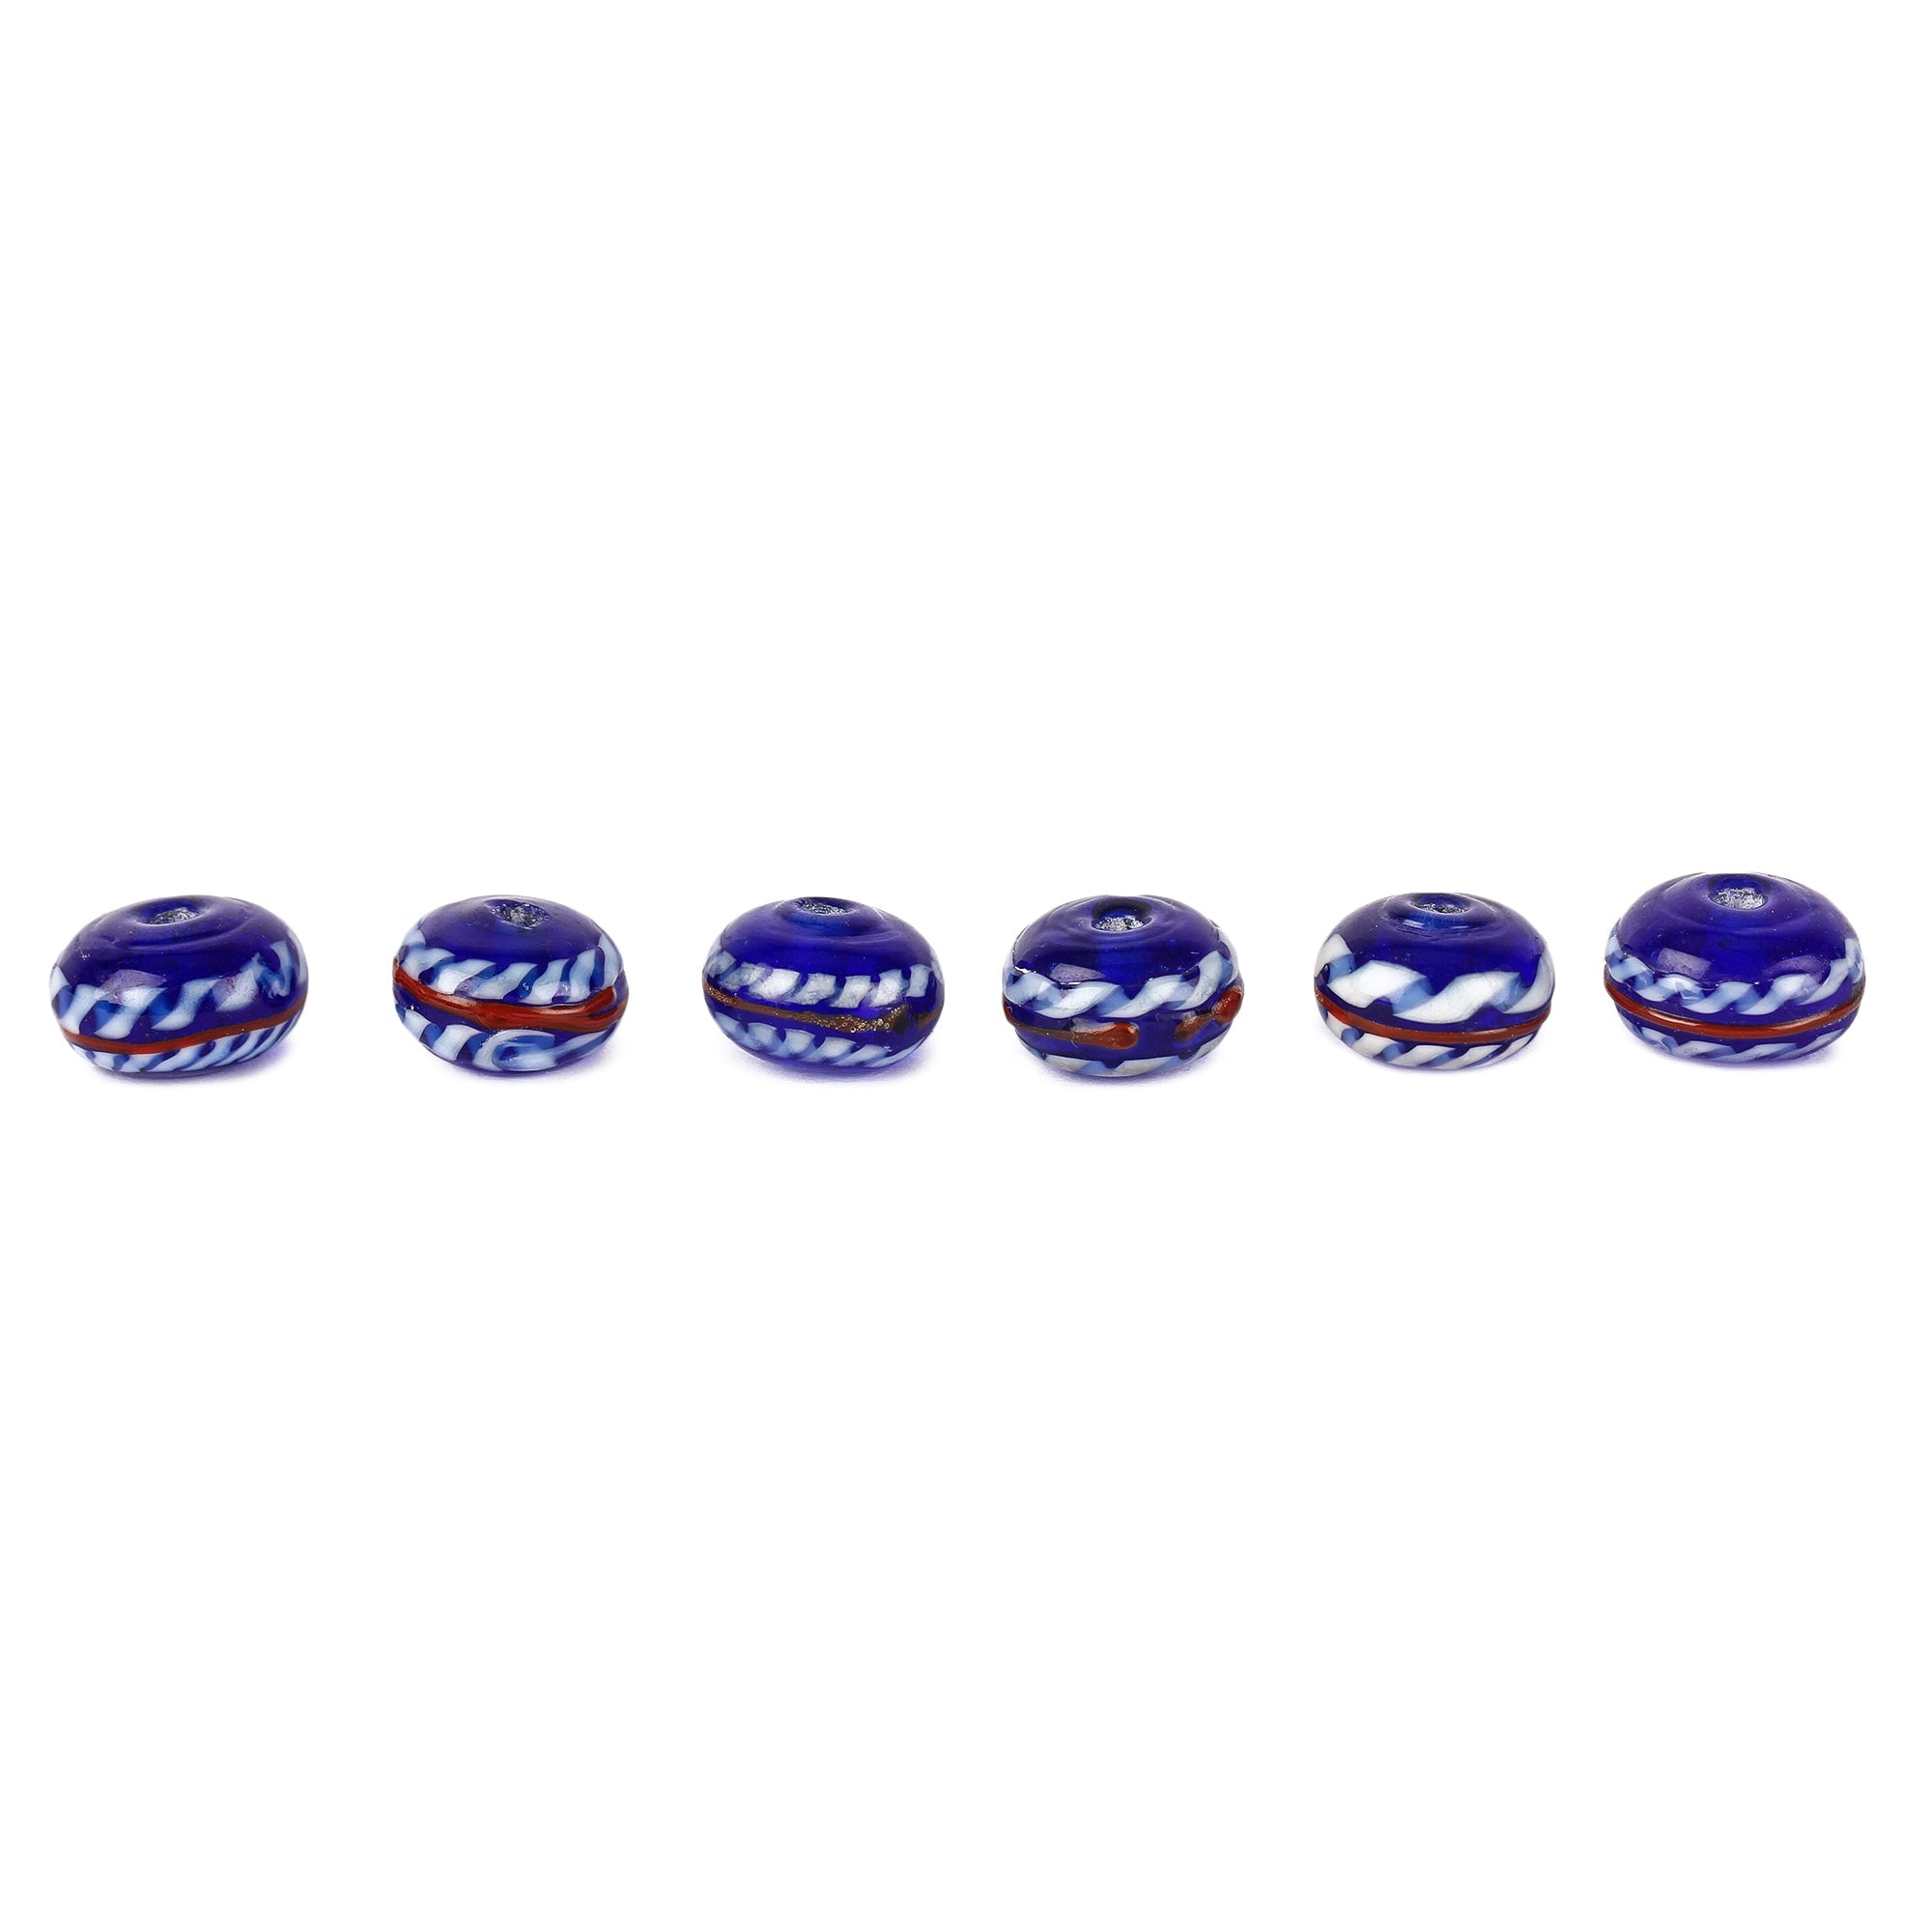 Blue glass bead with twisted decoration